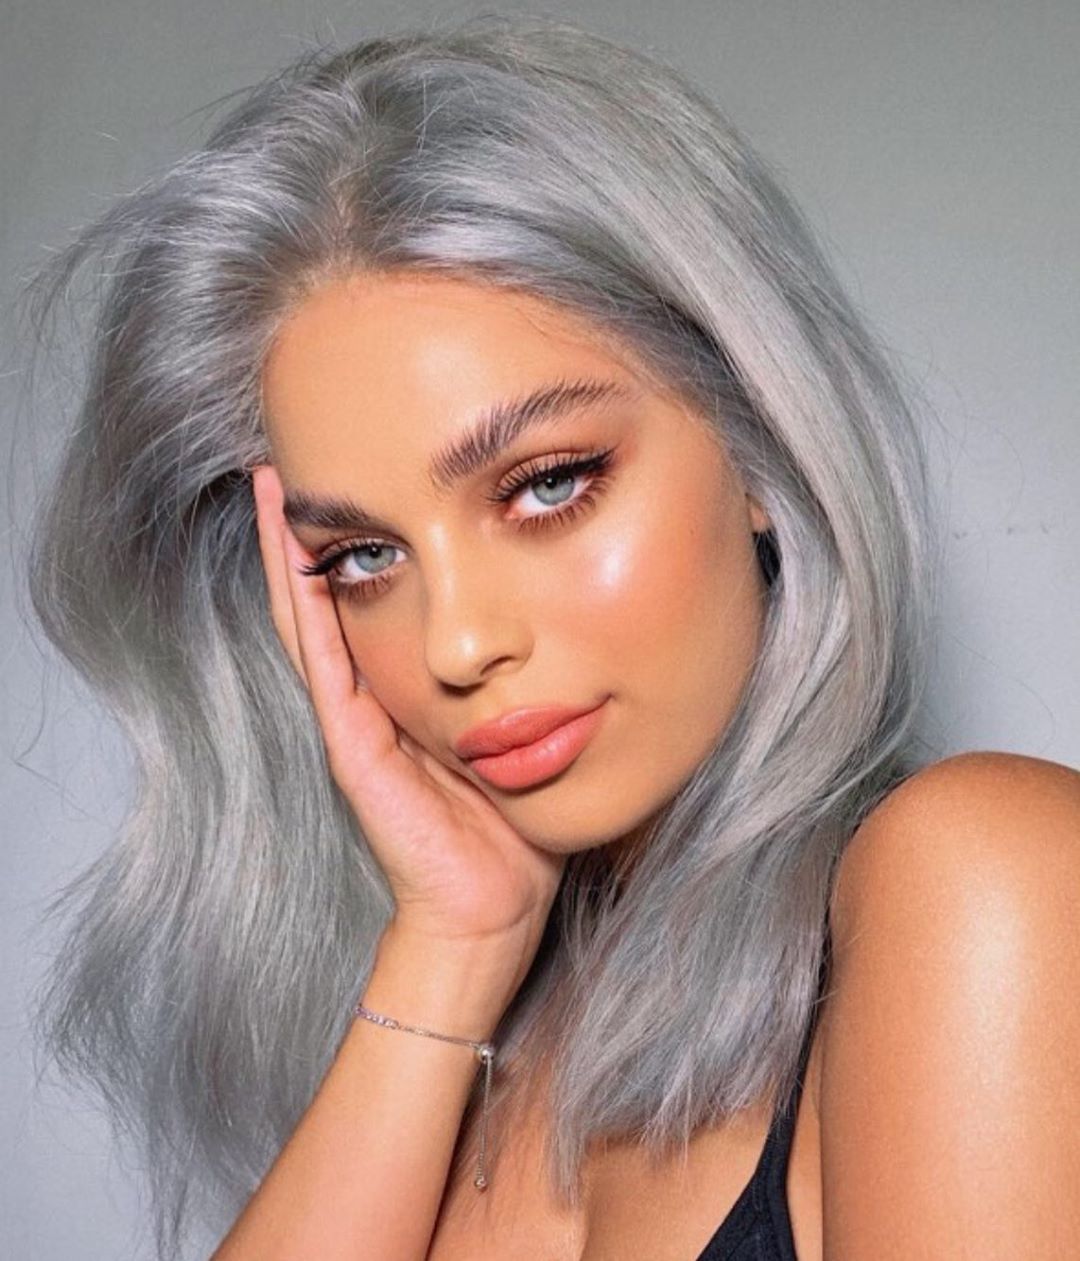 76 Fierce Photos That Will Inspire You to Try the Granny Hair Trend